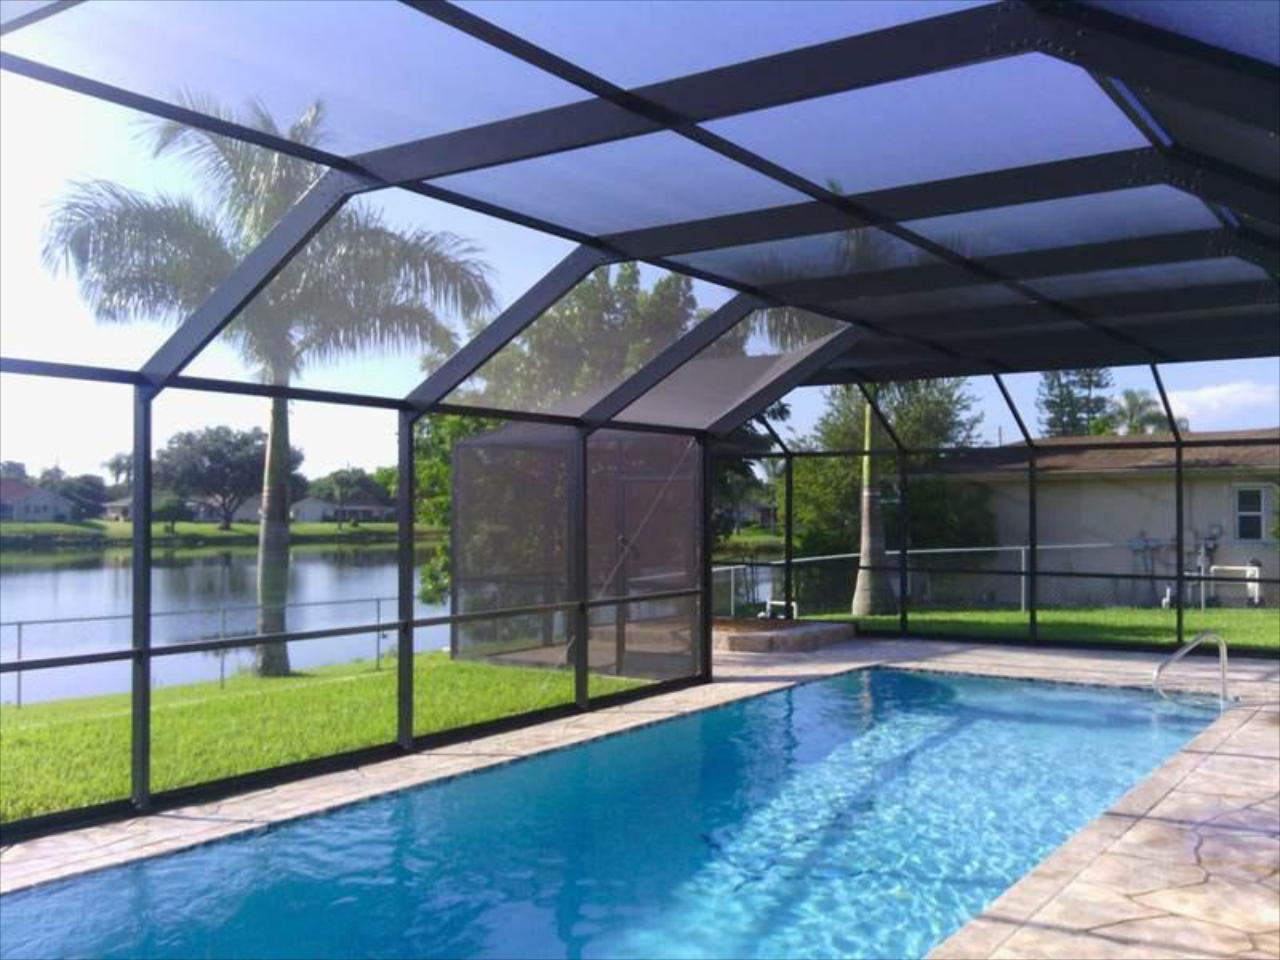 Reliable Pool Care in Venice, FL and surrounding areas.